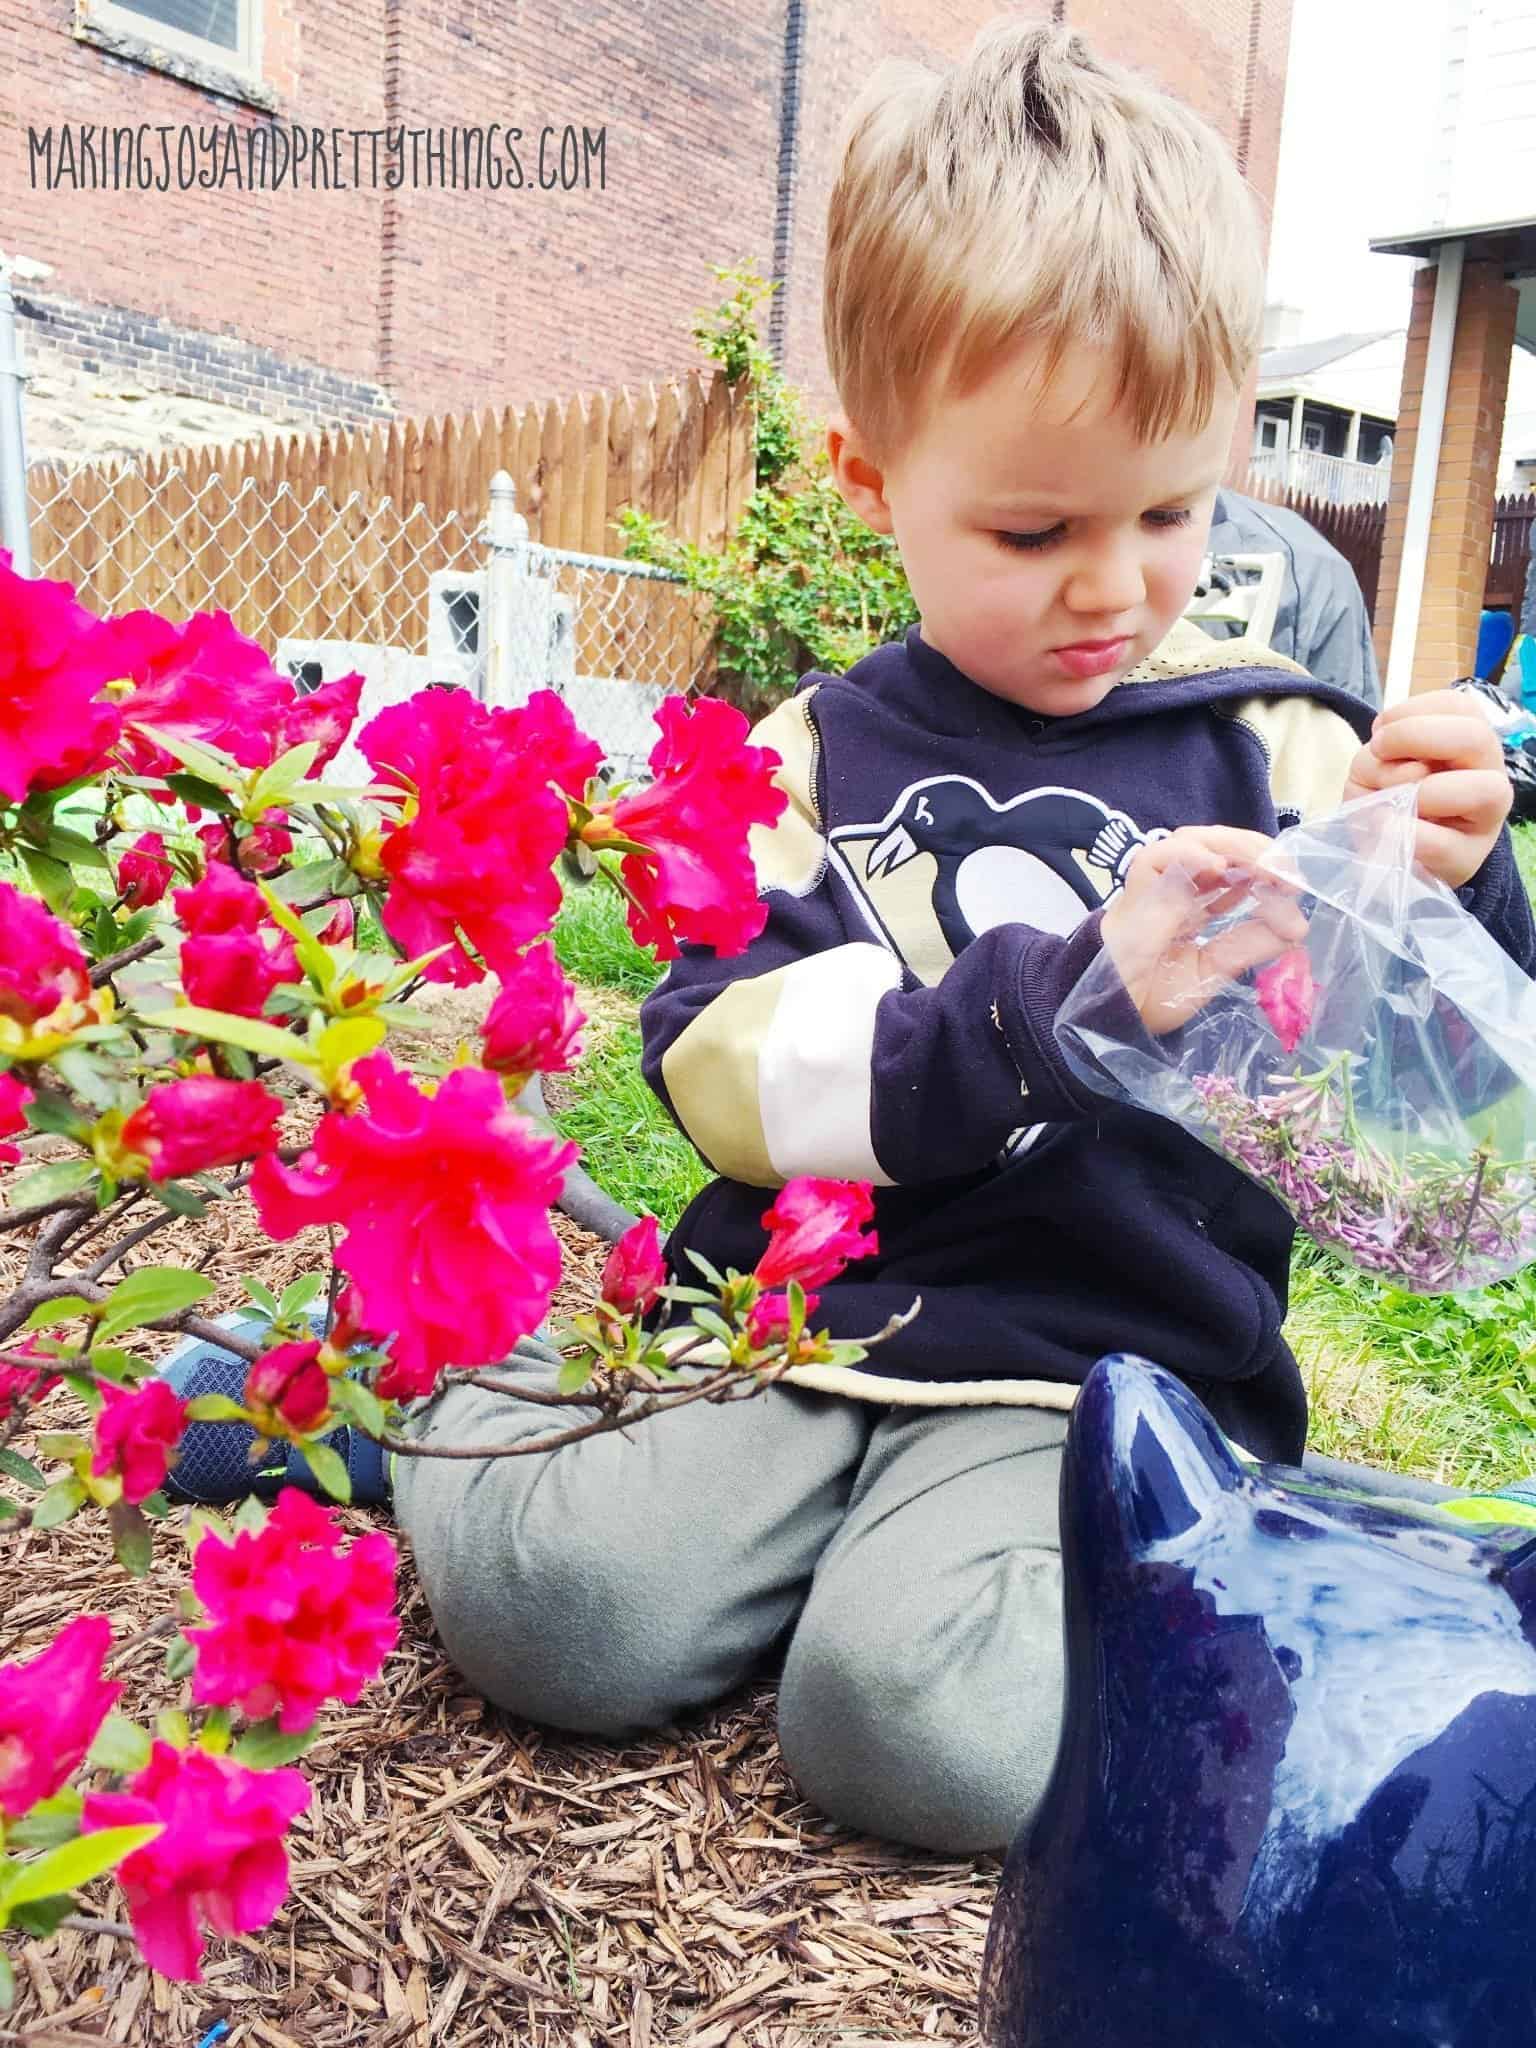 A little boy sits outside, picking petals of pink flowers off a bush and putting them in a plastic bag for a pressed flower suncatcher craft.